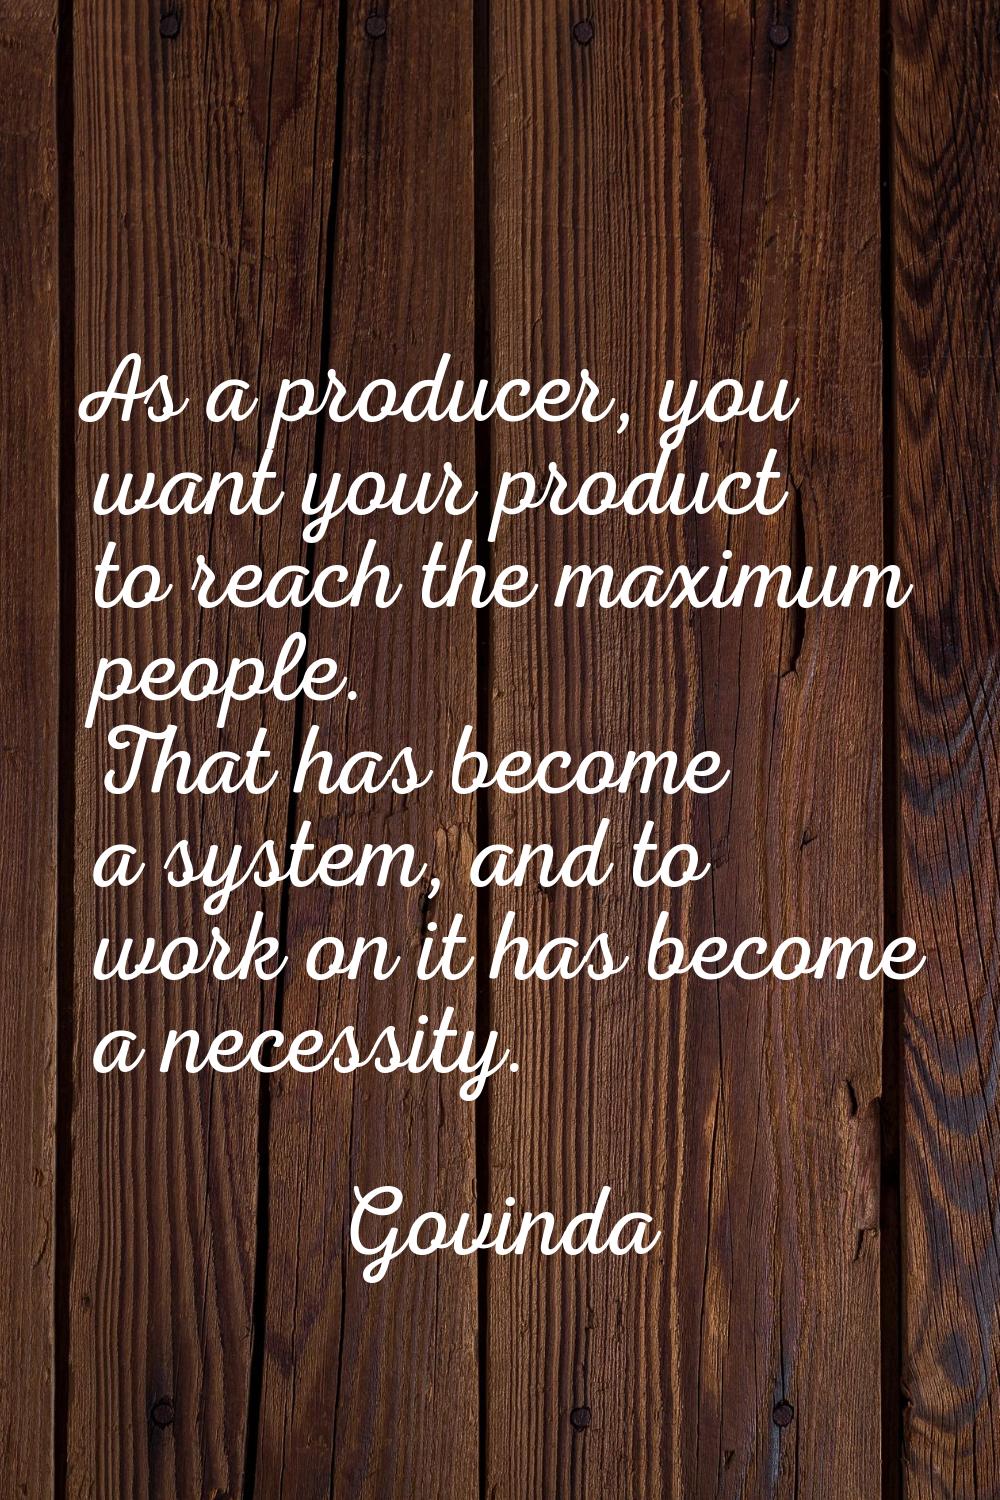 As a producer, you want your product to reach the maximum people. That has become a system, and to 